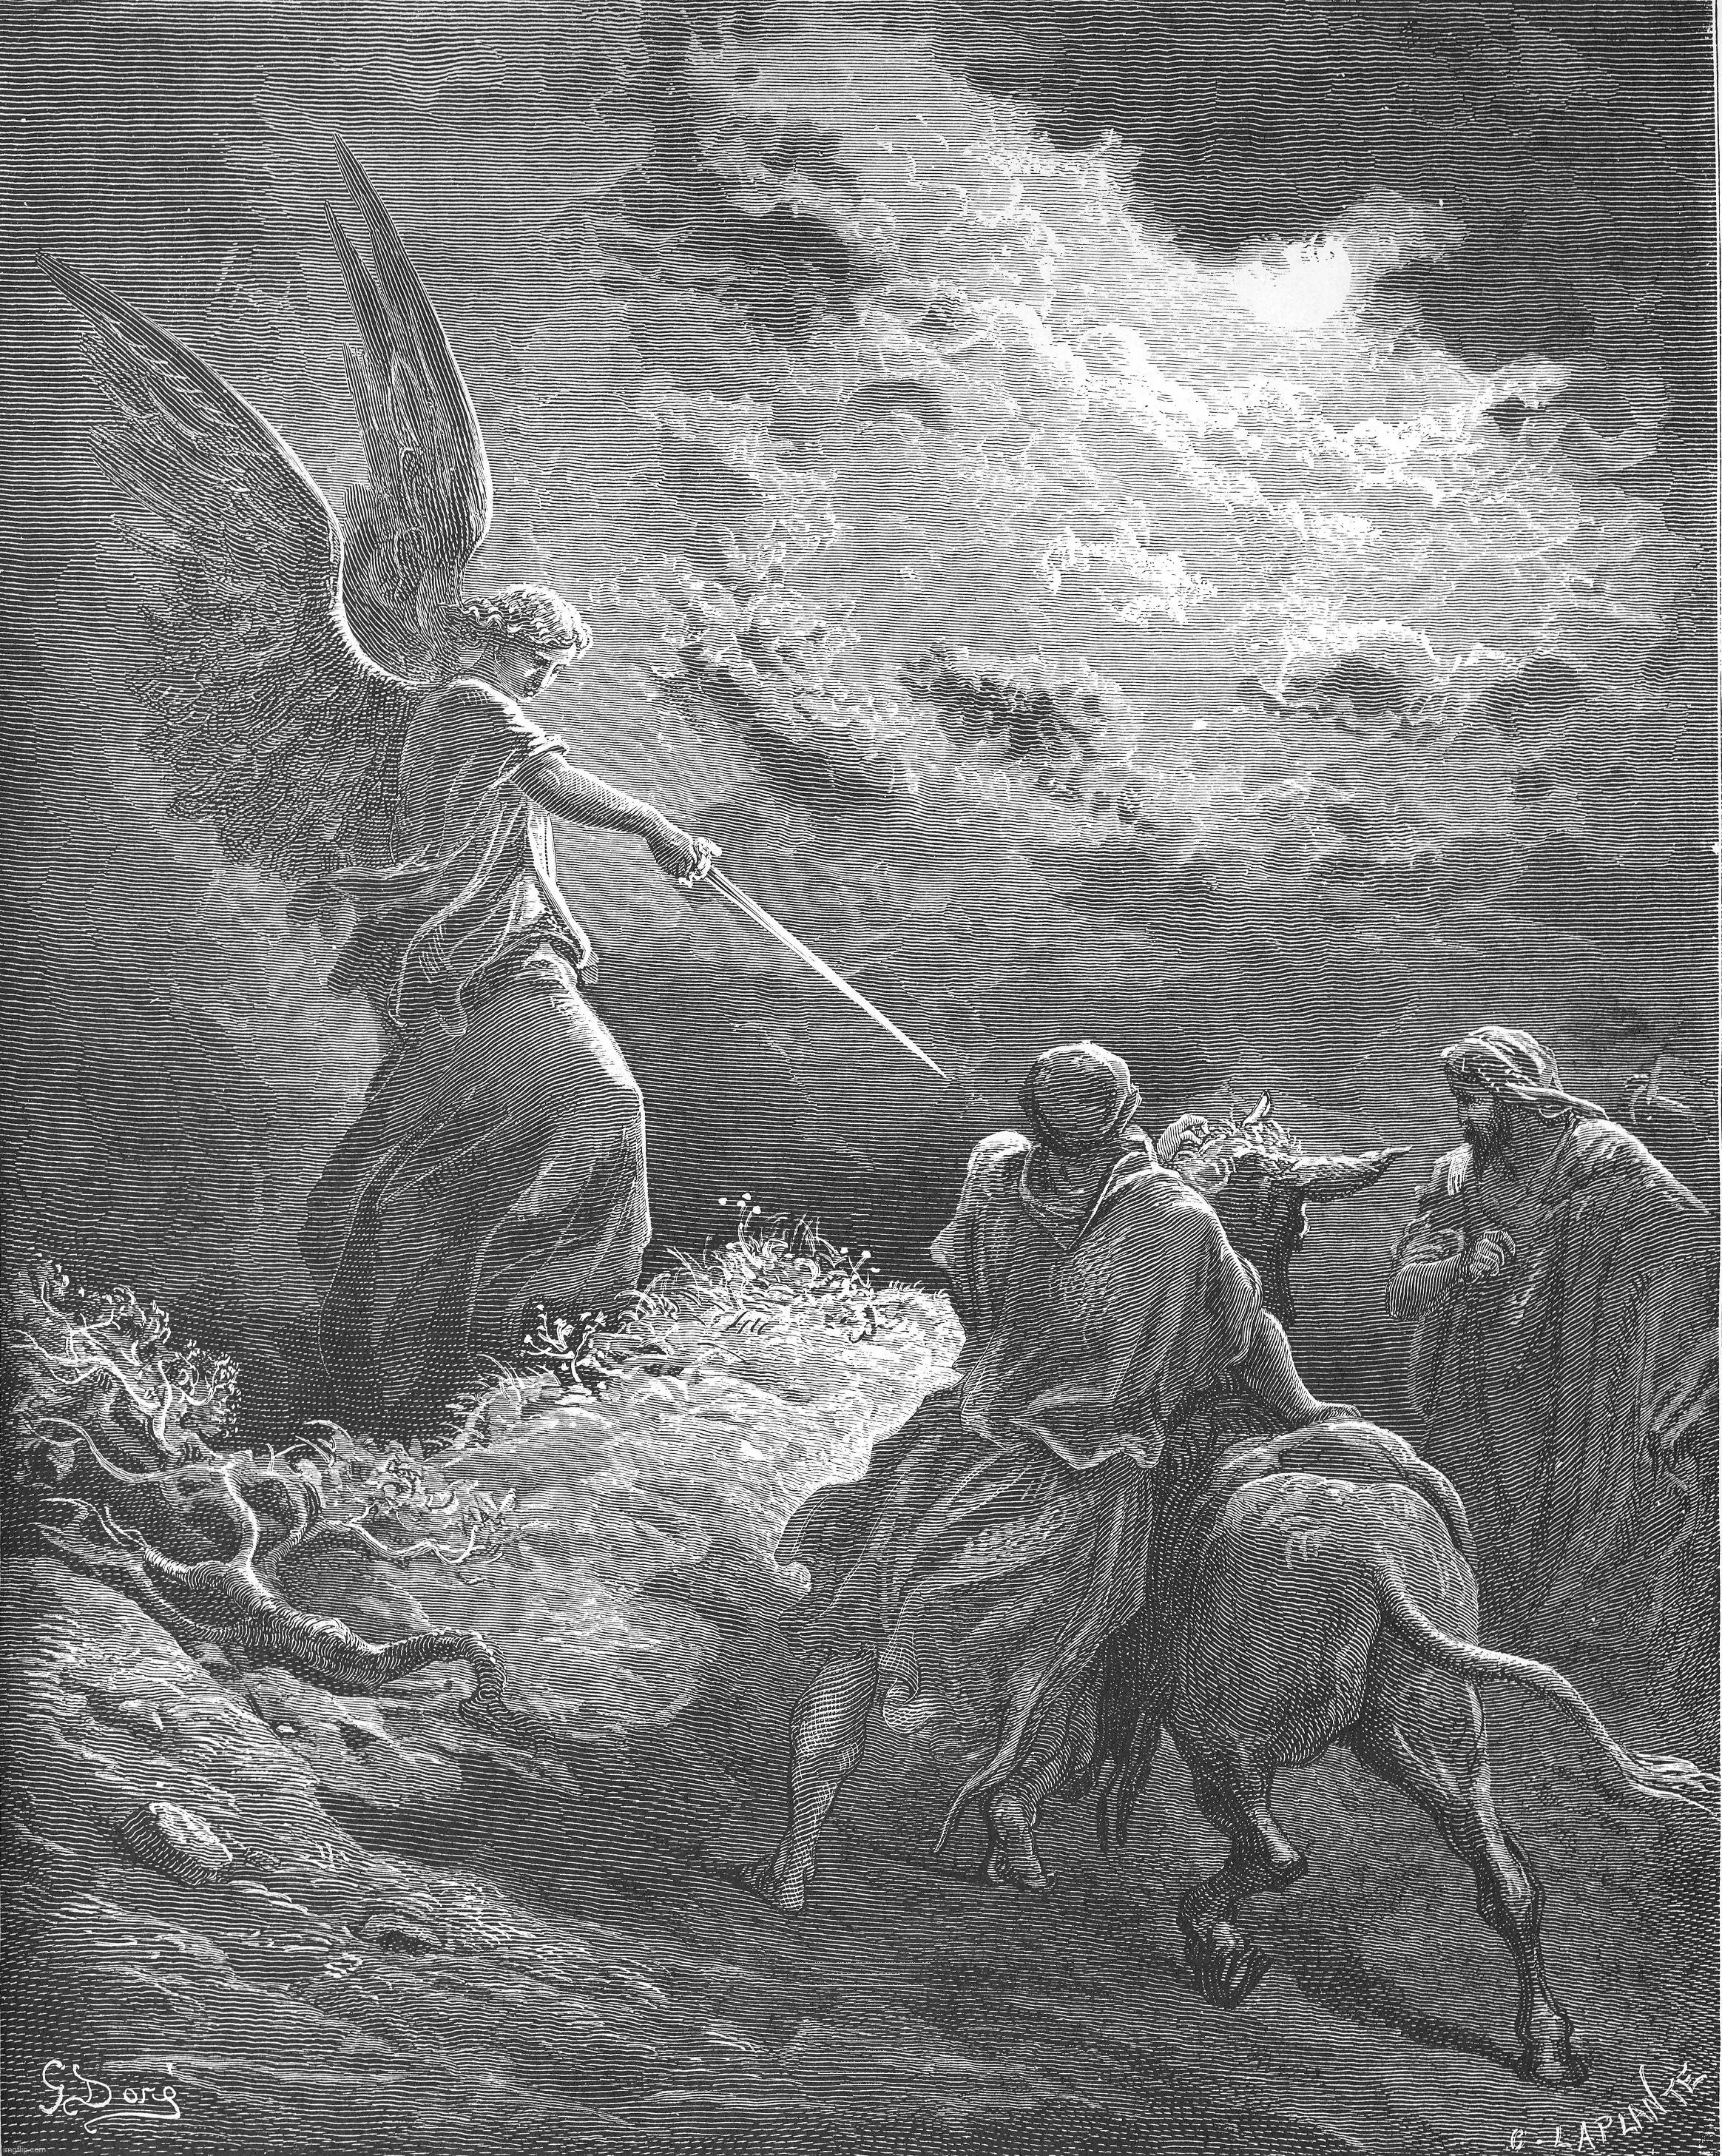 ***BALAAM’S DONKEY (NUMBERS 22:21-39)***
  


*21 BALAAM GOT UP IN THE MORNING, SADDLED HIS DONKEY AND WENT WITH THE MOABITE OFFICIALS. 22 BUT GOD WAS VERY ANGRY WHEN HE WENT, AND THE ANGEL OF THE LORD STOOD IN THE ROAD TO OPPOSE HIM. BALAAM WAS RIDING ON HIS DONKEY, AND HIS TWO SERVANTS WERE WITH HIM. 23 WHEN THE DONKEY SAW THE ANGEL OF THE LORD STANDING IN THE ROAD WITH A DRAWN SWORD IN HIS HAND, IT TURNED OFF THE ROAD INTO A FIELD. BALAAM BEAT IT TO GET IT BACK ON THE ROAD.*
  

  
*24 THEN THE ANGEL OF THE LORD STOOD IN A NARROW PATH THROUGH THE VINEYARDS, WITH WALLS ON BOTH SIDES. 25 WHEN THE DONKEY SAW THE ANGEL OF THE LORD, IT PRESSED CLOSE TO THE WALL, CRUSHING BALAAM’S FOOT AGAINST IT. SO HE BEAT THE DONKEY AGAIN.*
  

  
*26 THEN THE ANGEL OF THE LORD MOVED ON AHEAD AND STOOD IN A NARROW PLACE WHERE THERE WAS NO ROOM TO TURN, EITHER TO THE RIGHT OR TO THE LEFT. 27 WHEN THE DONKEY SAW THE ANGEL OF THE LORD, IT LAY DOWN UNDER BALAAM, AND HE WAS ANGRY AND BEAT IT WITH HIS STAFF. 28 THEN THE LORD OPENED THE DONKEY’S MOUTH, AND IT SAID TO BALAAM, “WHAT HAVE I DONE TO YOU TO MAKE YOU BEAT ME THESE THREE TIMES?”*
  

  
*29 BALAAM ANSWERED THE DONKEY, “YOU HAVE MADE A FOOL OF ME! IF ONLY I HAD A SWORD IN MY HAND, I WOULD KILL YOU RIGHT NOW.”*
  

  
*30 THE DONKEY SAID TO BALAAM, “AM I NOT YOUR OWN DONKEY, WHICH YOU HAVE ALWAYS RIDDEN, TO THIS DAY? HAVE I BEEN IN THE HABIT OF DOING THIS TO YOU?”*
  

  
*“NO,” HE SAID.*
  

  
*31 THEN THE LORD OPENED BALAAM’S EYES, AND HE SAW THE ANGEL OF THE LORD STANDING IN THE ROAD WITH HIS SWORD DRAWN. SO HE BOWED LOW AND FELL FACEDOWN.*
  

  
*32 THE ANGEL OF THE LORD ASKED HIM, “WHY HAVE YOU BEATEN YOUR DONKEY THESE THREE TIMES? I HAVE COME HERE TO OPPOSE YOU BECAUSE YOUR PATH IS A RECKLESS ONE BEFORE ME.\[A\] 33 THE DONKEY SAW ME AND TURNED AWAY FROM ME THESE THREE TIMES. IF IT HAD NOT TURNED AWAY, I WOULD CERTAINLY HAVE KILLED YOU BY NOW, BUT I WOULD HAVE SPARED IT.”*
  

  
*34 BALAAM SAID TO THE ANGEL OF THE LORD, “I HAVE SINNED. I DID NOT REALIZE YOU WERE STANDING IN THE ROAD TO OPPOSE ME. NOW IF YOU ARE DISPLEASED, I WILL GO BACK.”*
  

  
*35 THE ANGEL OF THE LORD SAID TO BALAAM, “GO WITH THE MEN, BUT SPEAK ONLY WHAT I TELL YOU.” SO BALAAM WENT WITH BALAK’S OFFICIALS.*
  

  
*36 WHEN BALAK HEARD THAT BALAAM WAS COMING, HE WENT OUT TO MEET HIM AT THE MOABITE TOWN ON THE ARNON BORDER, AT THE EDGE OF HIS TERRITORY. 37 BALAK SAID TO BALAAM, “DID I NOT SEND YOU AN URGENT SUMMONS? WHY DIDN’T YOU COME TO ME? AM I REALLY NOT ABLE TO REWARD YOU?”*
  

  
*38 “WELL, I HAVE COME TO YOU NOW,” BALAAM REPLIED. “BUT I CAN’T SAY WHATEVER I PLEASE. I MUST SPEAK ONLY WHAT GOD PUTS IN MY MOUTH.”*
  

  
*39 THEN BALAAM WENT WITH BALAK TO KIRIATH HUZOTH.* | made w/ Imgflip meme maker